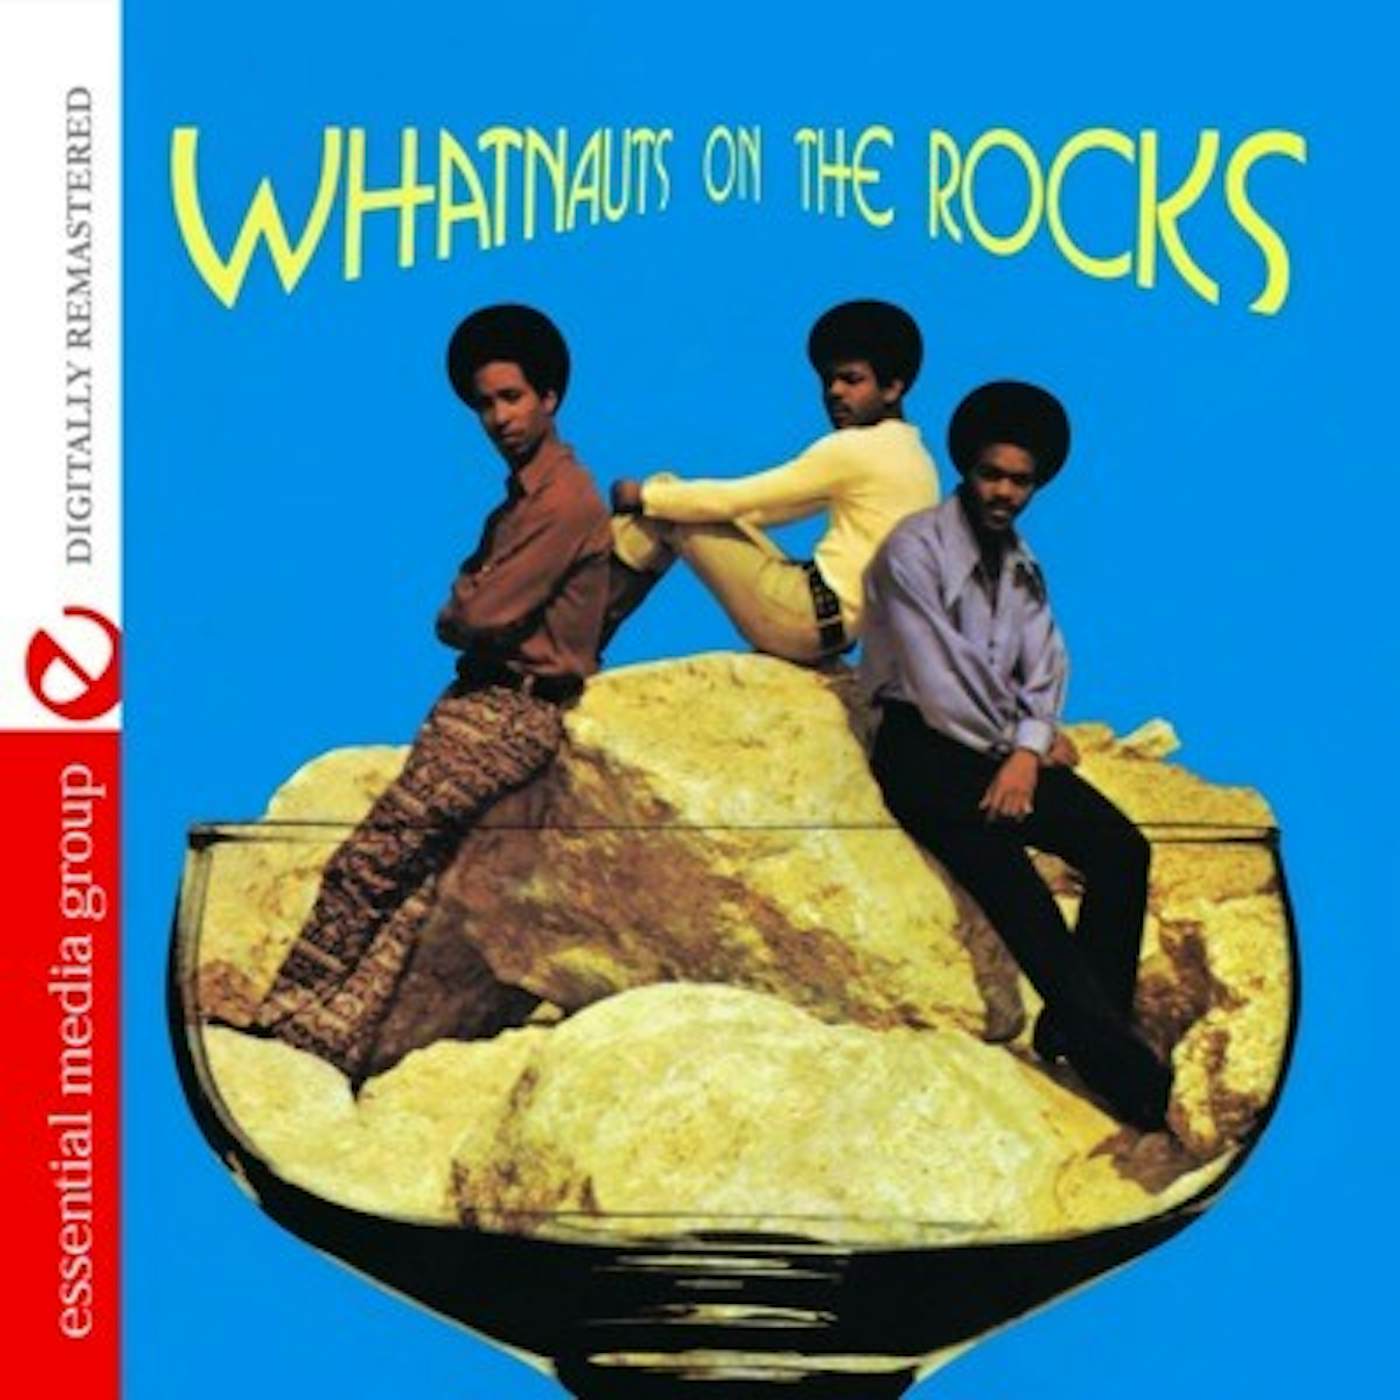 The Whatnauts ON THE ROCKS CD